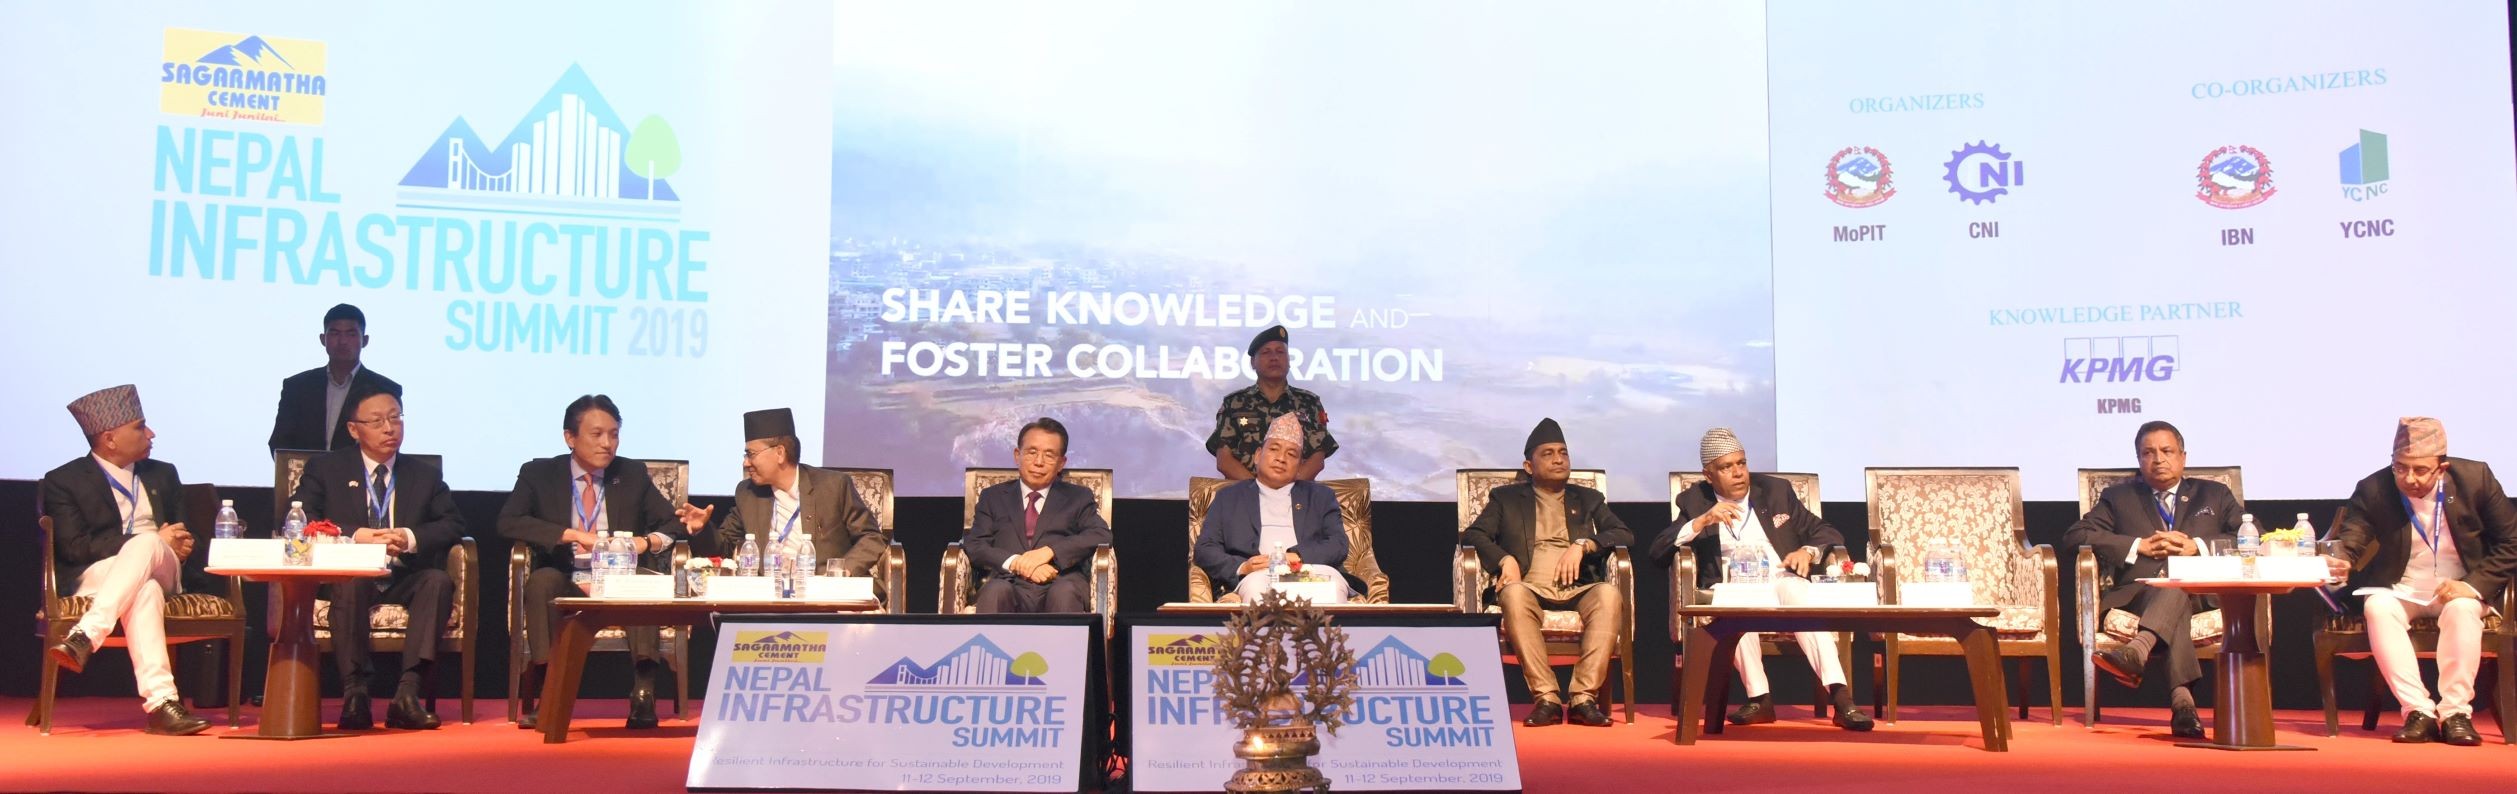 two-day-infrastructure-summit-2019-concludes-on-thursday